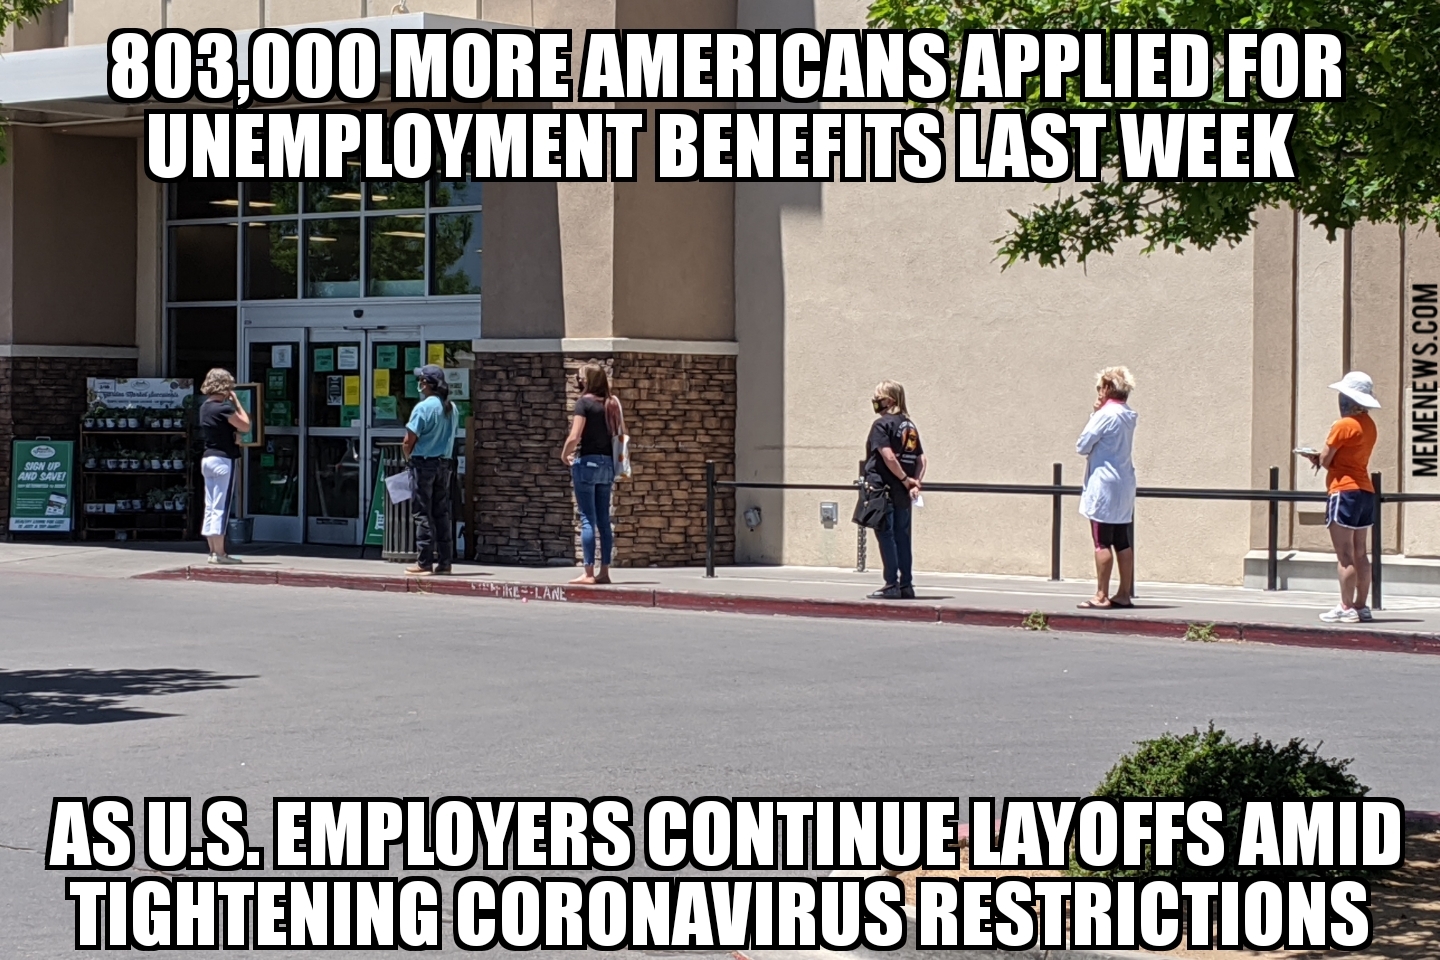 803,000 more Americans apply for unemployment